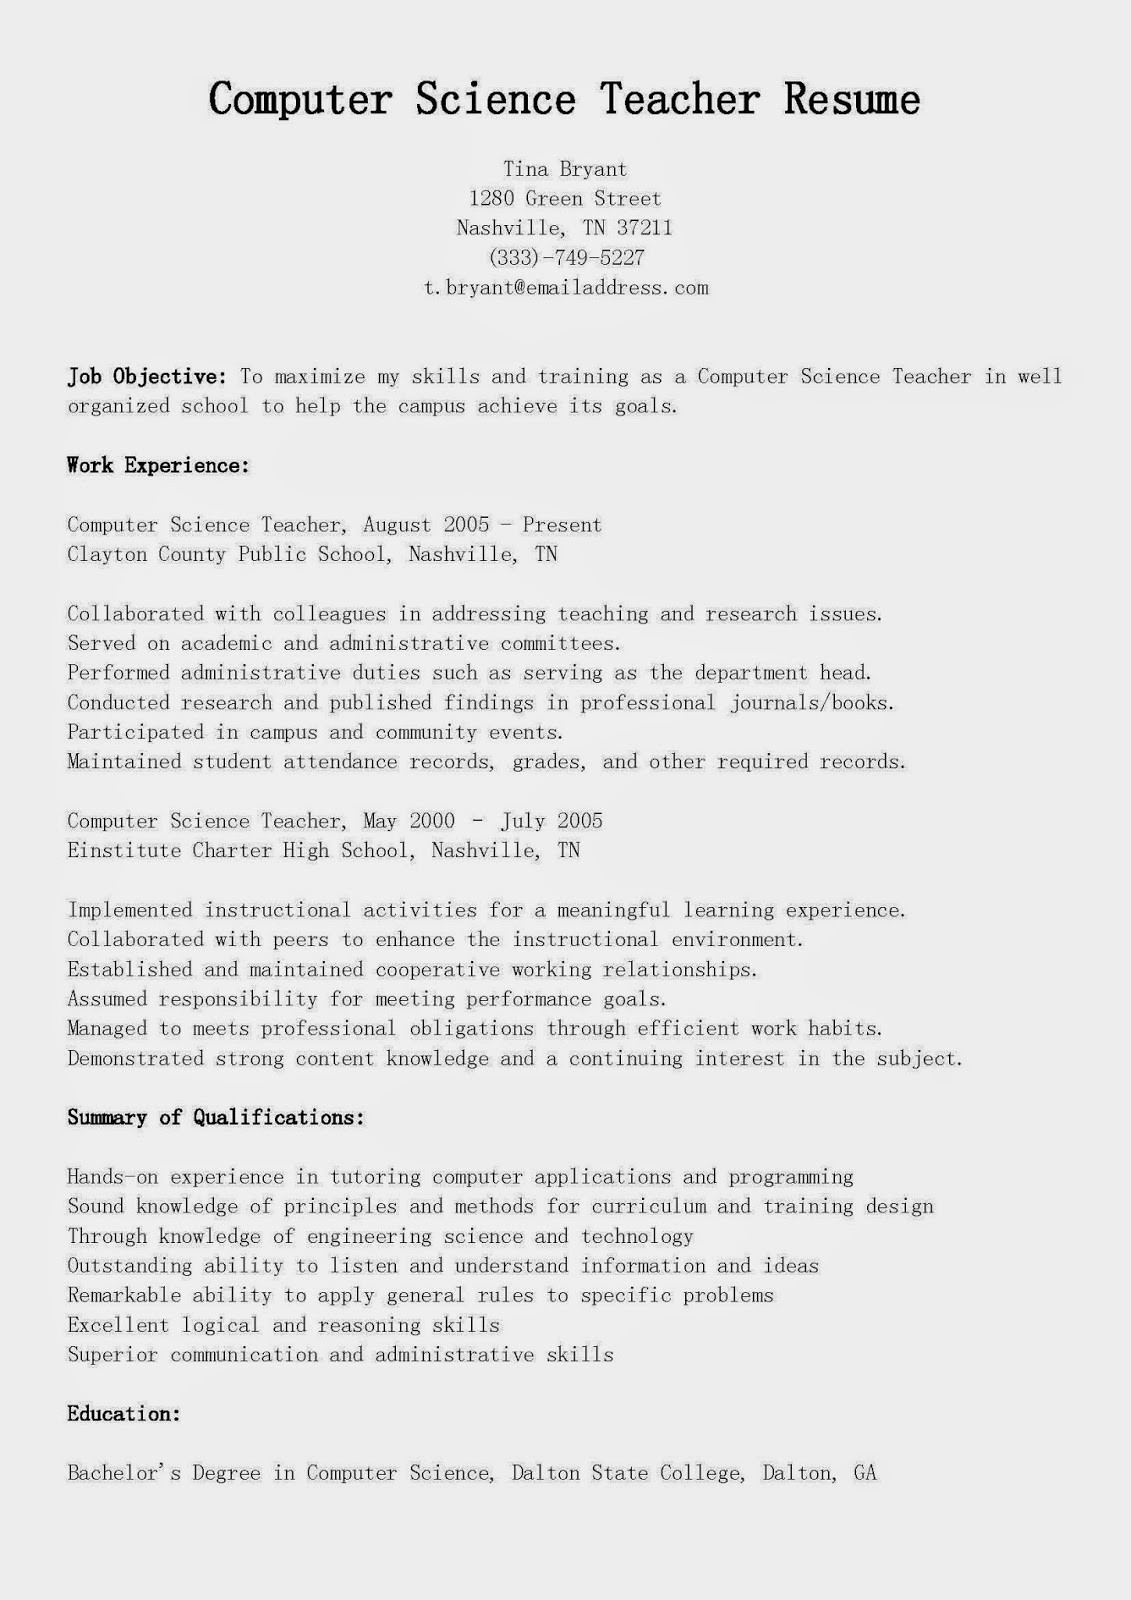 Sample Resume for Lecturer In Computer Science Resume Samples Puter Science Teacher Resume Sample